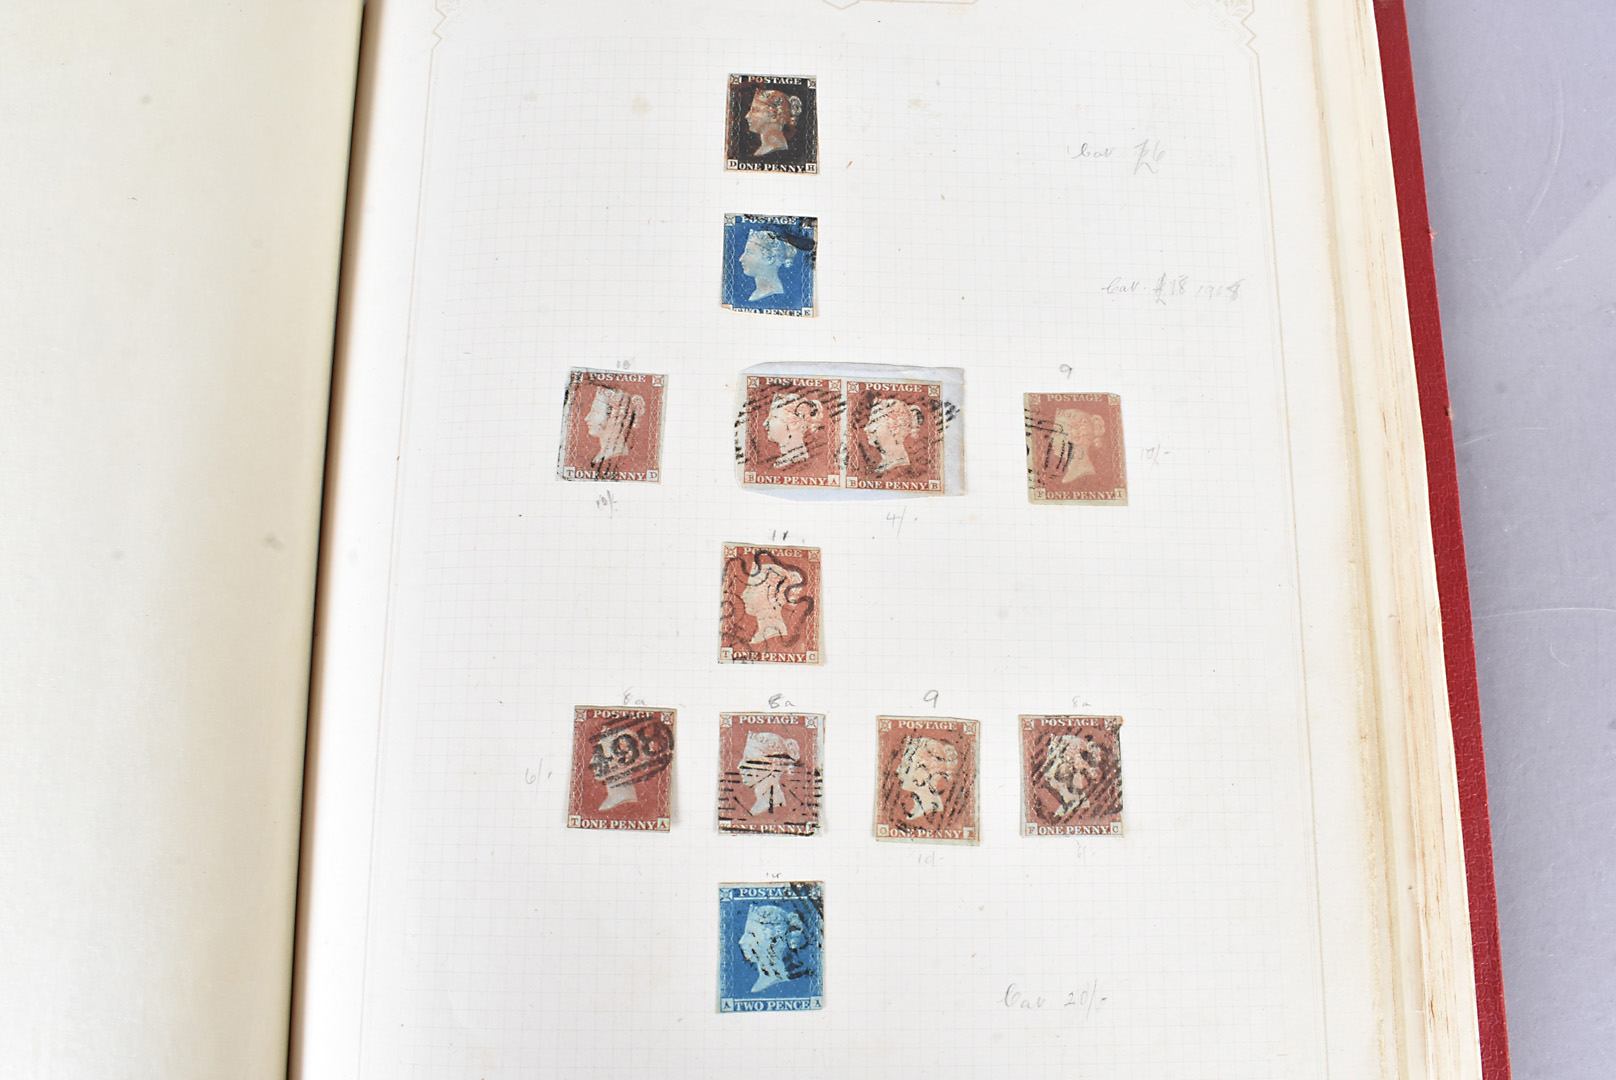 A well presented Victorian and later British Stamp album, including Penny Black (DH), Penny Red Pair